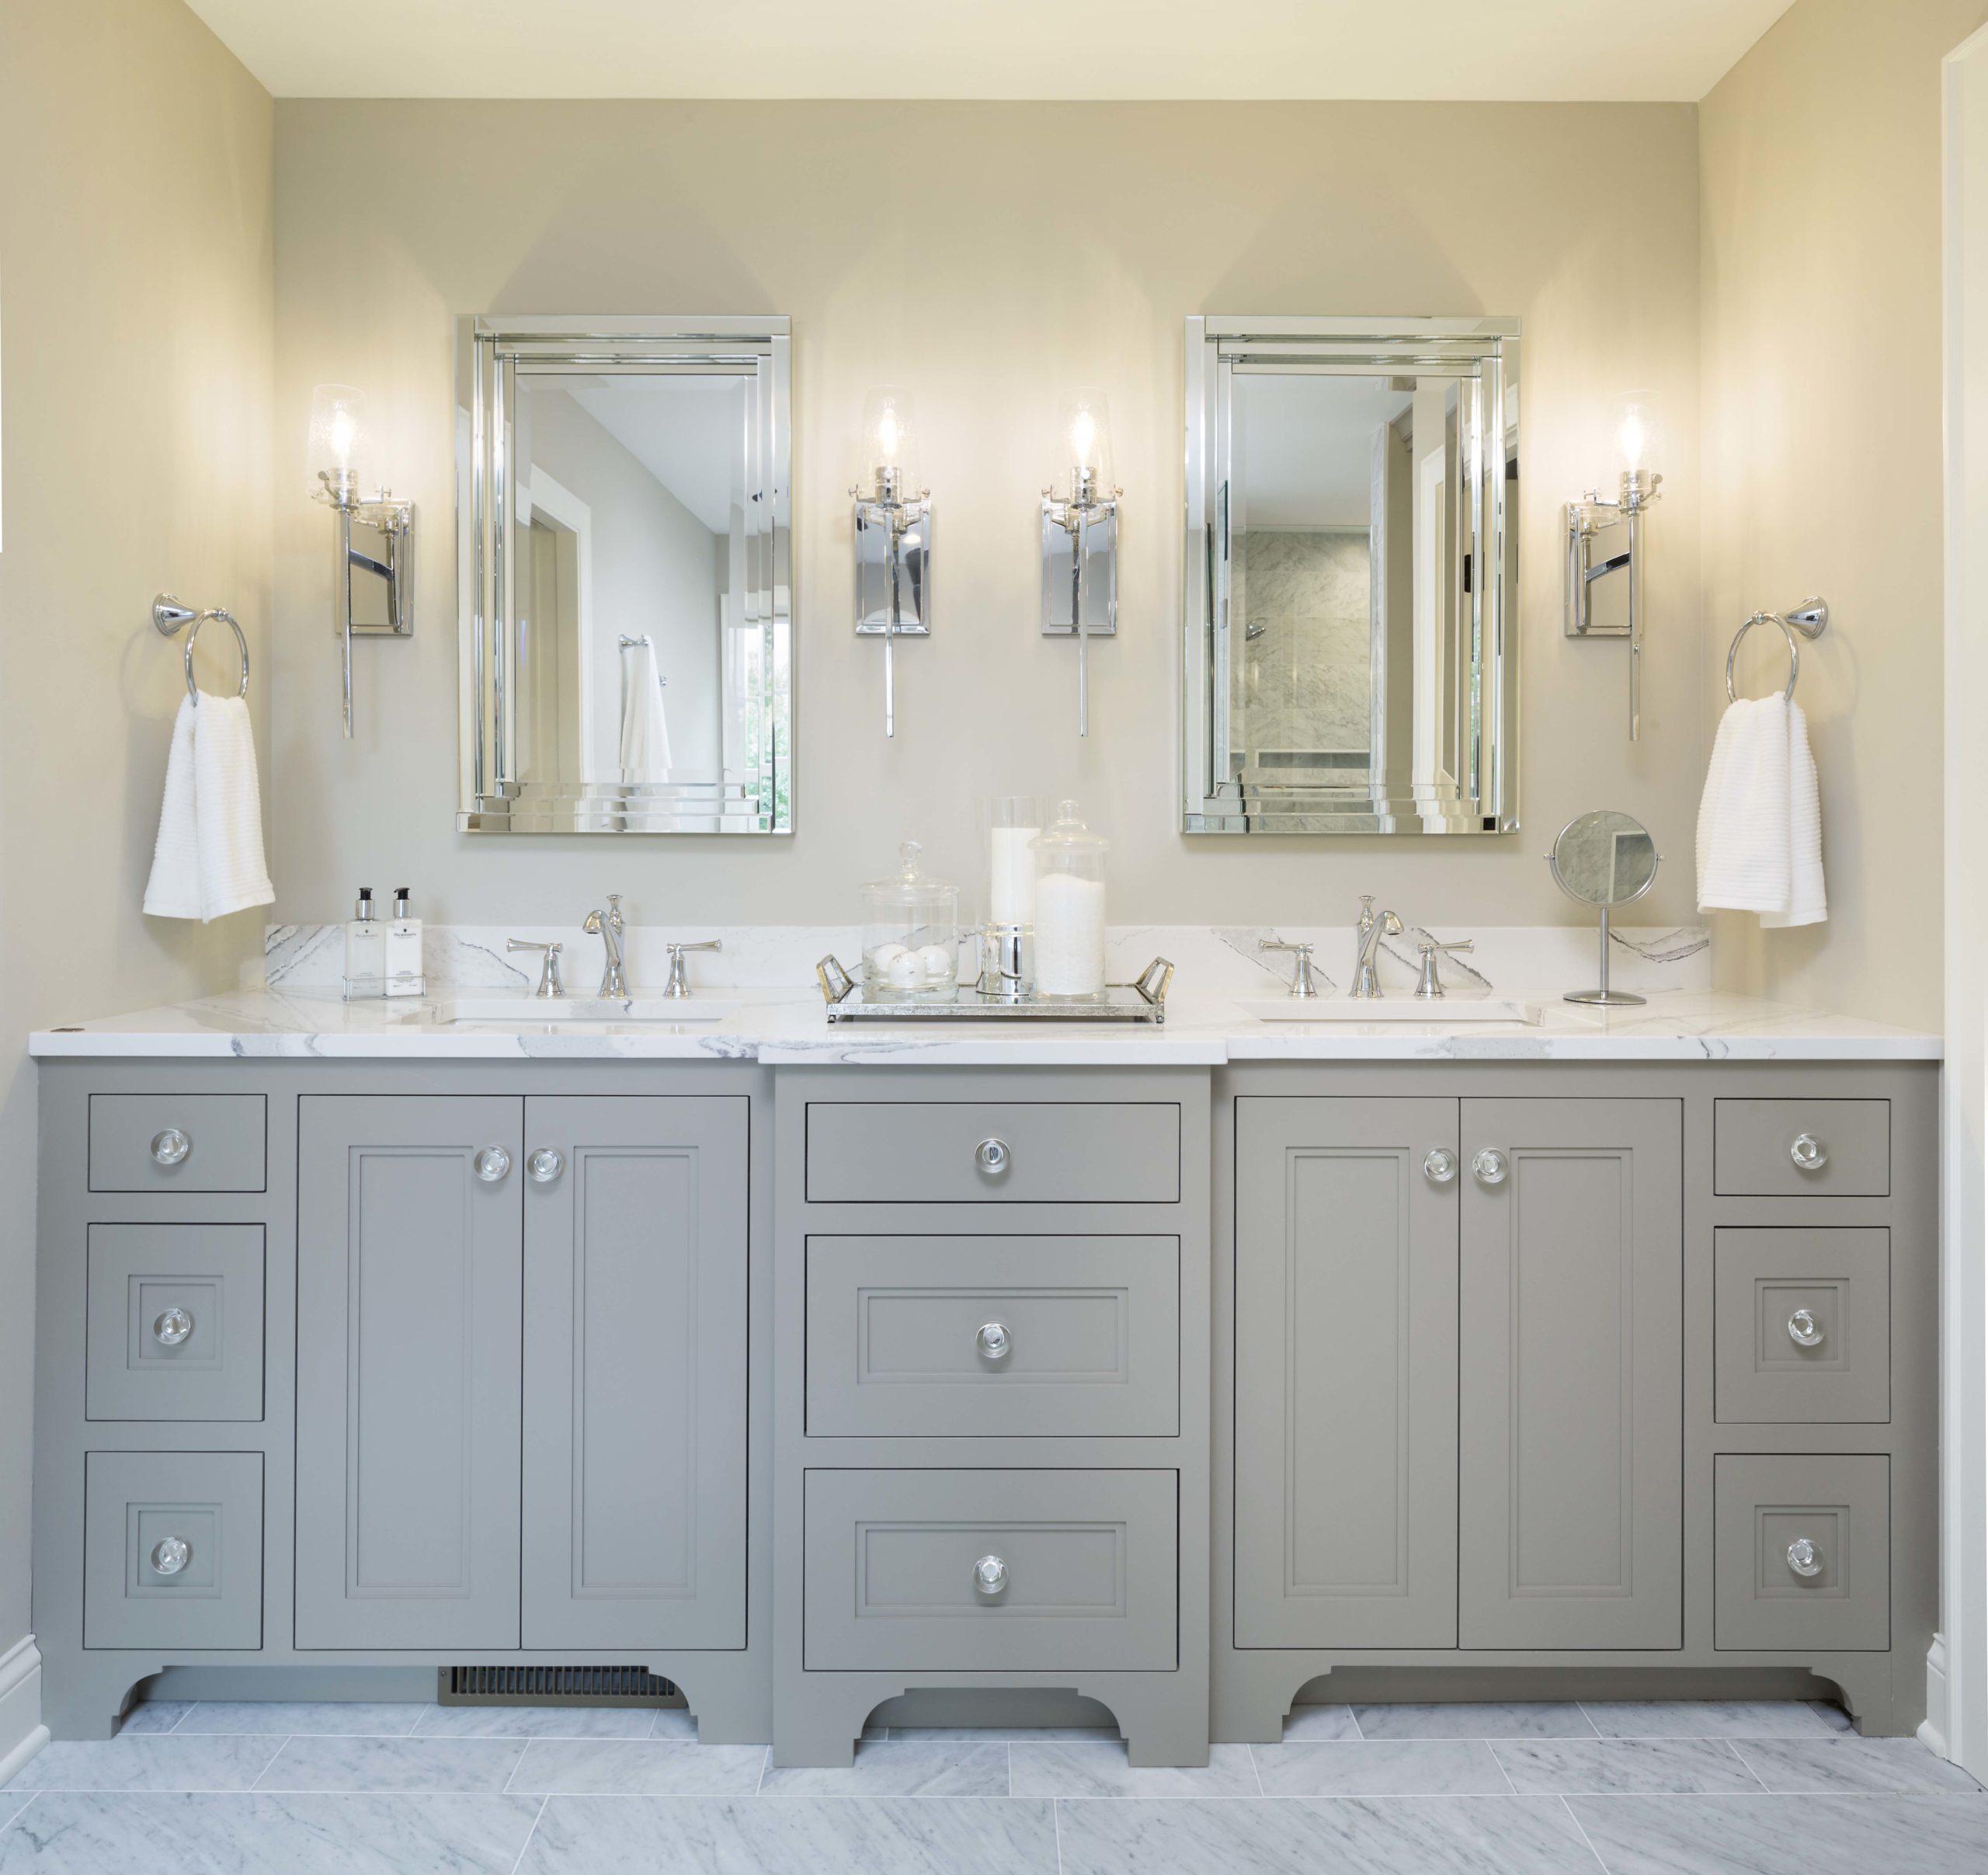 A bathroom with gray cabinets and mirrors.